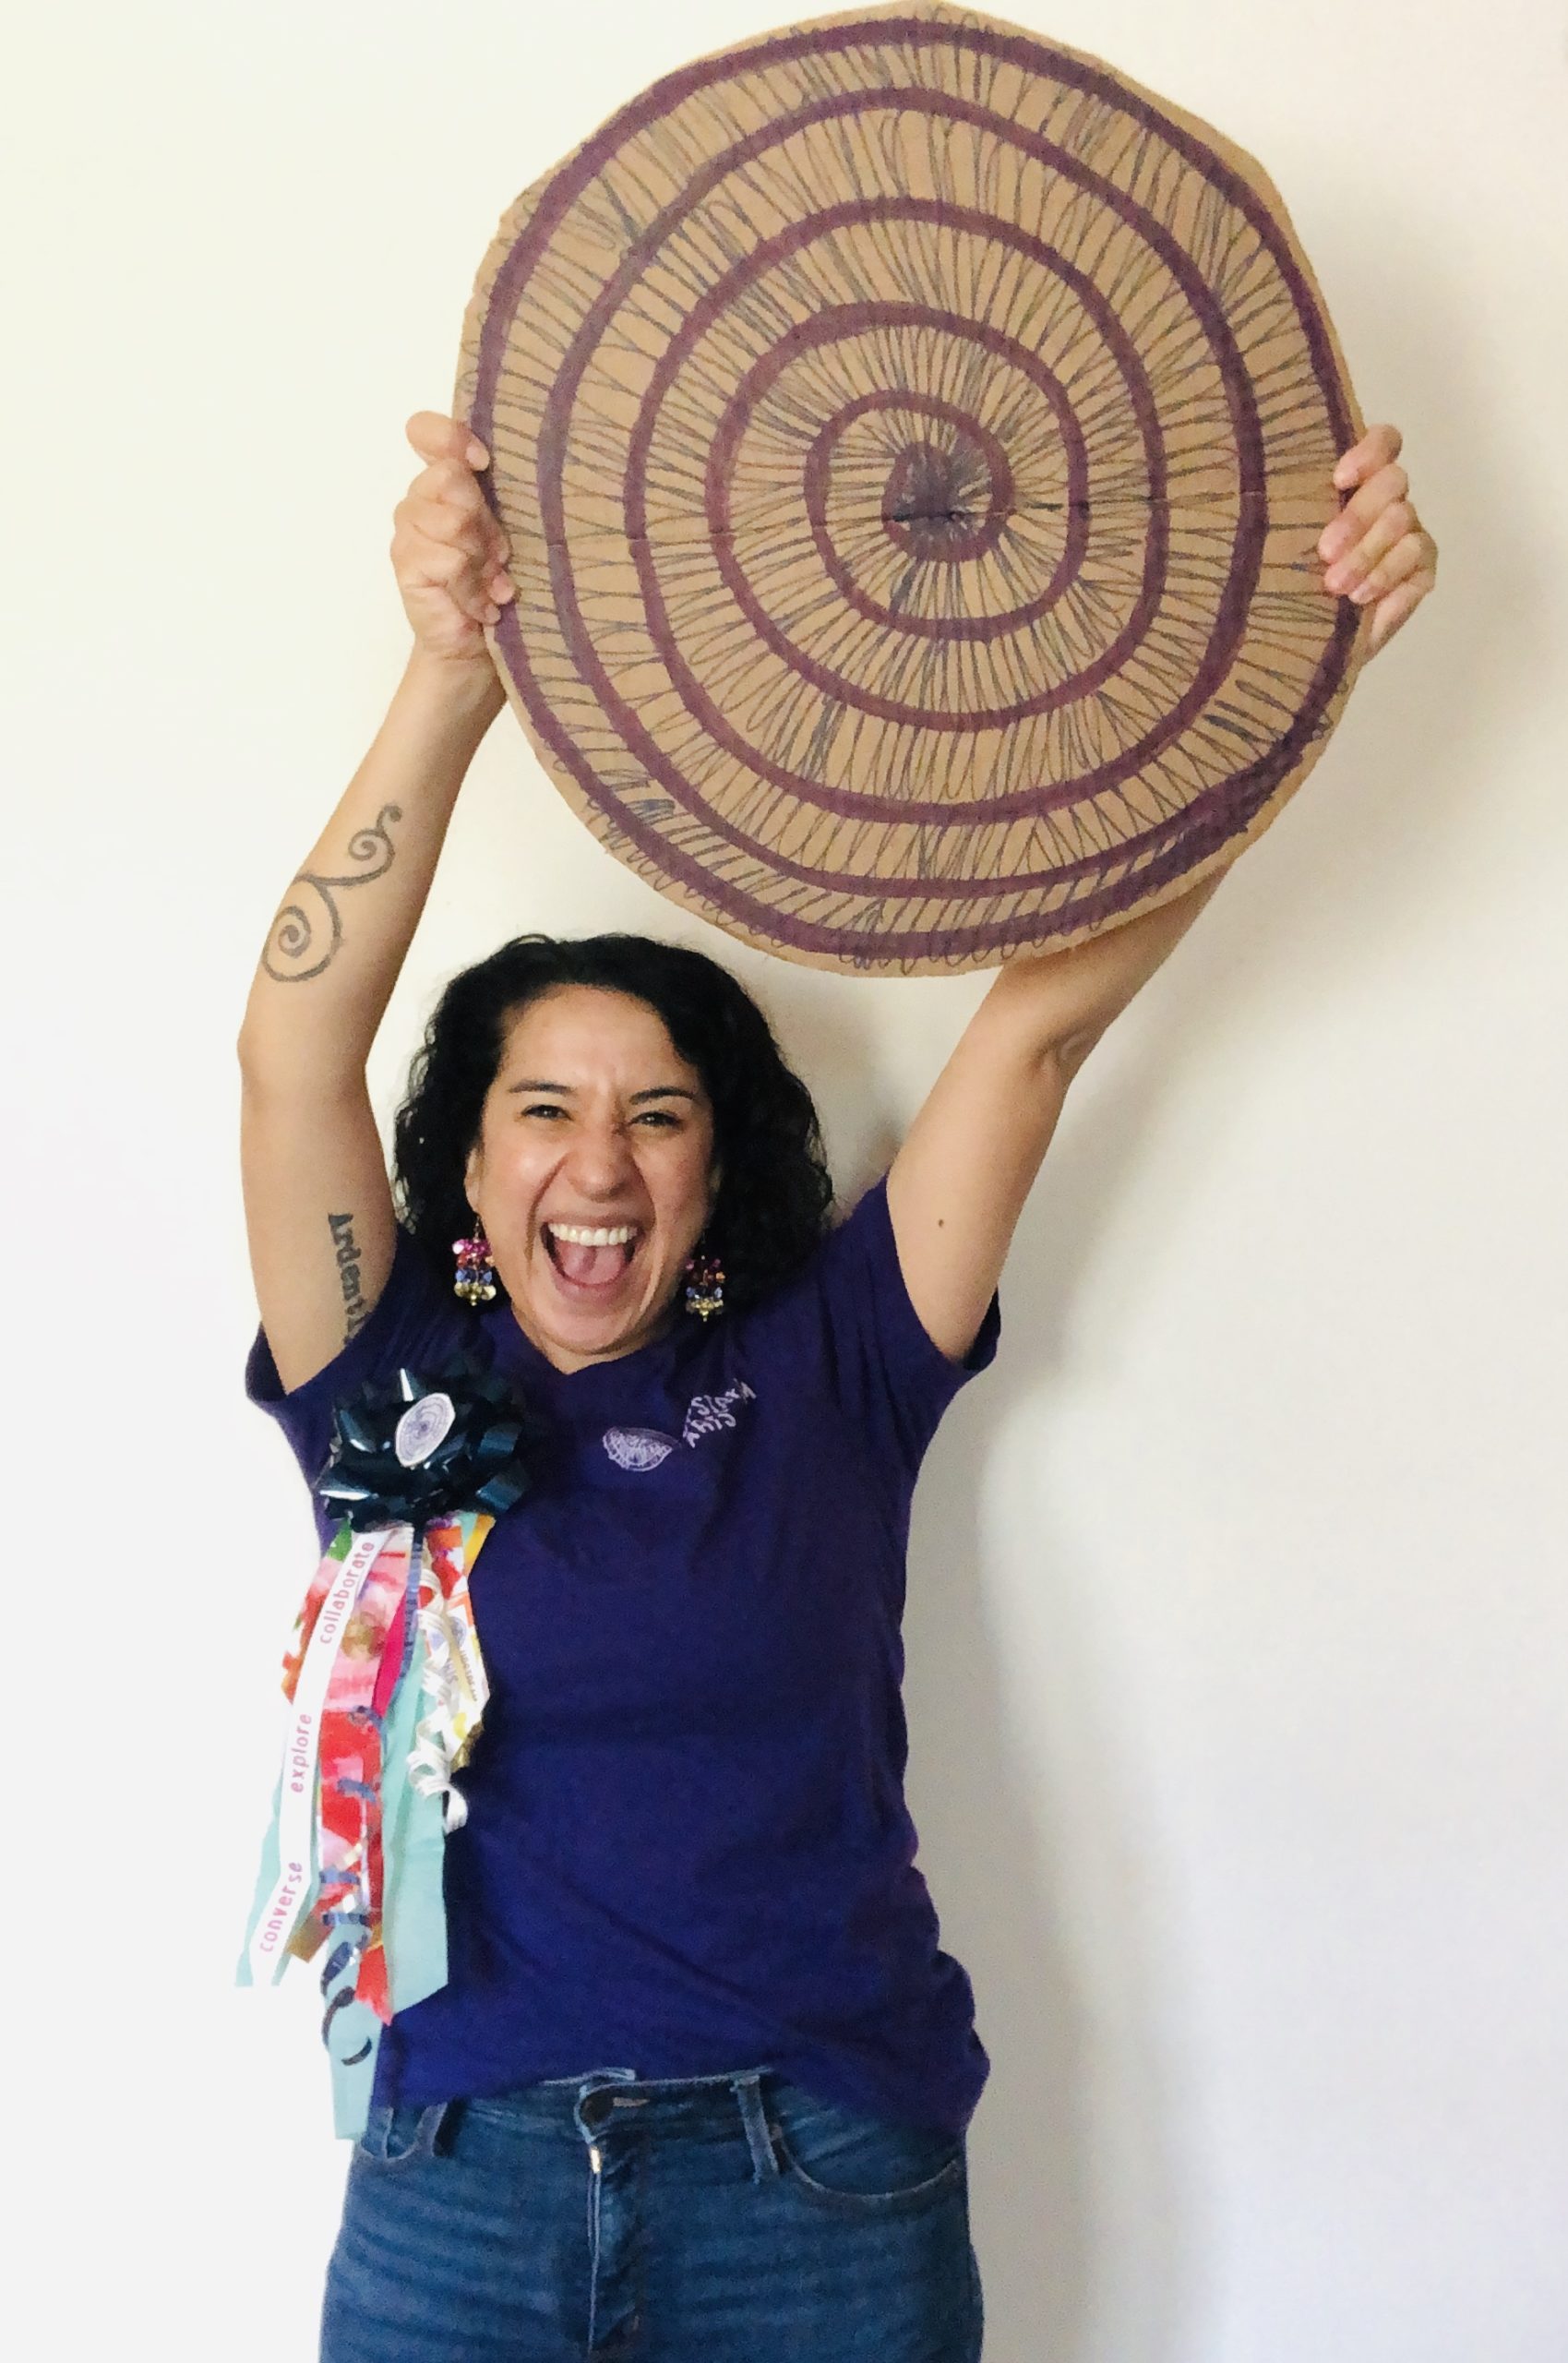 Cristina Castro, Upstream Arts Teaching Artist and At Home Homecoming co-host, wearing a UA t-shirt holds up a homemade UA spiral logo made out of cardboard. On their shirt is a homemade "homecoming mum" from UA annual reports. They are cheering enthusiastically!